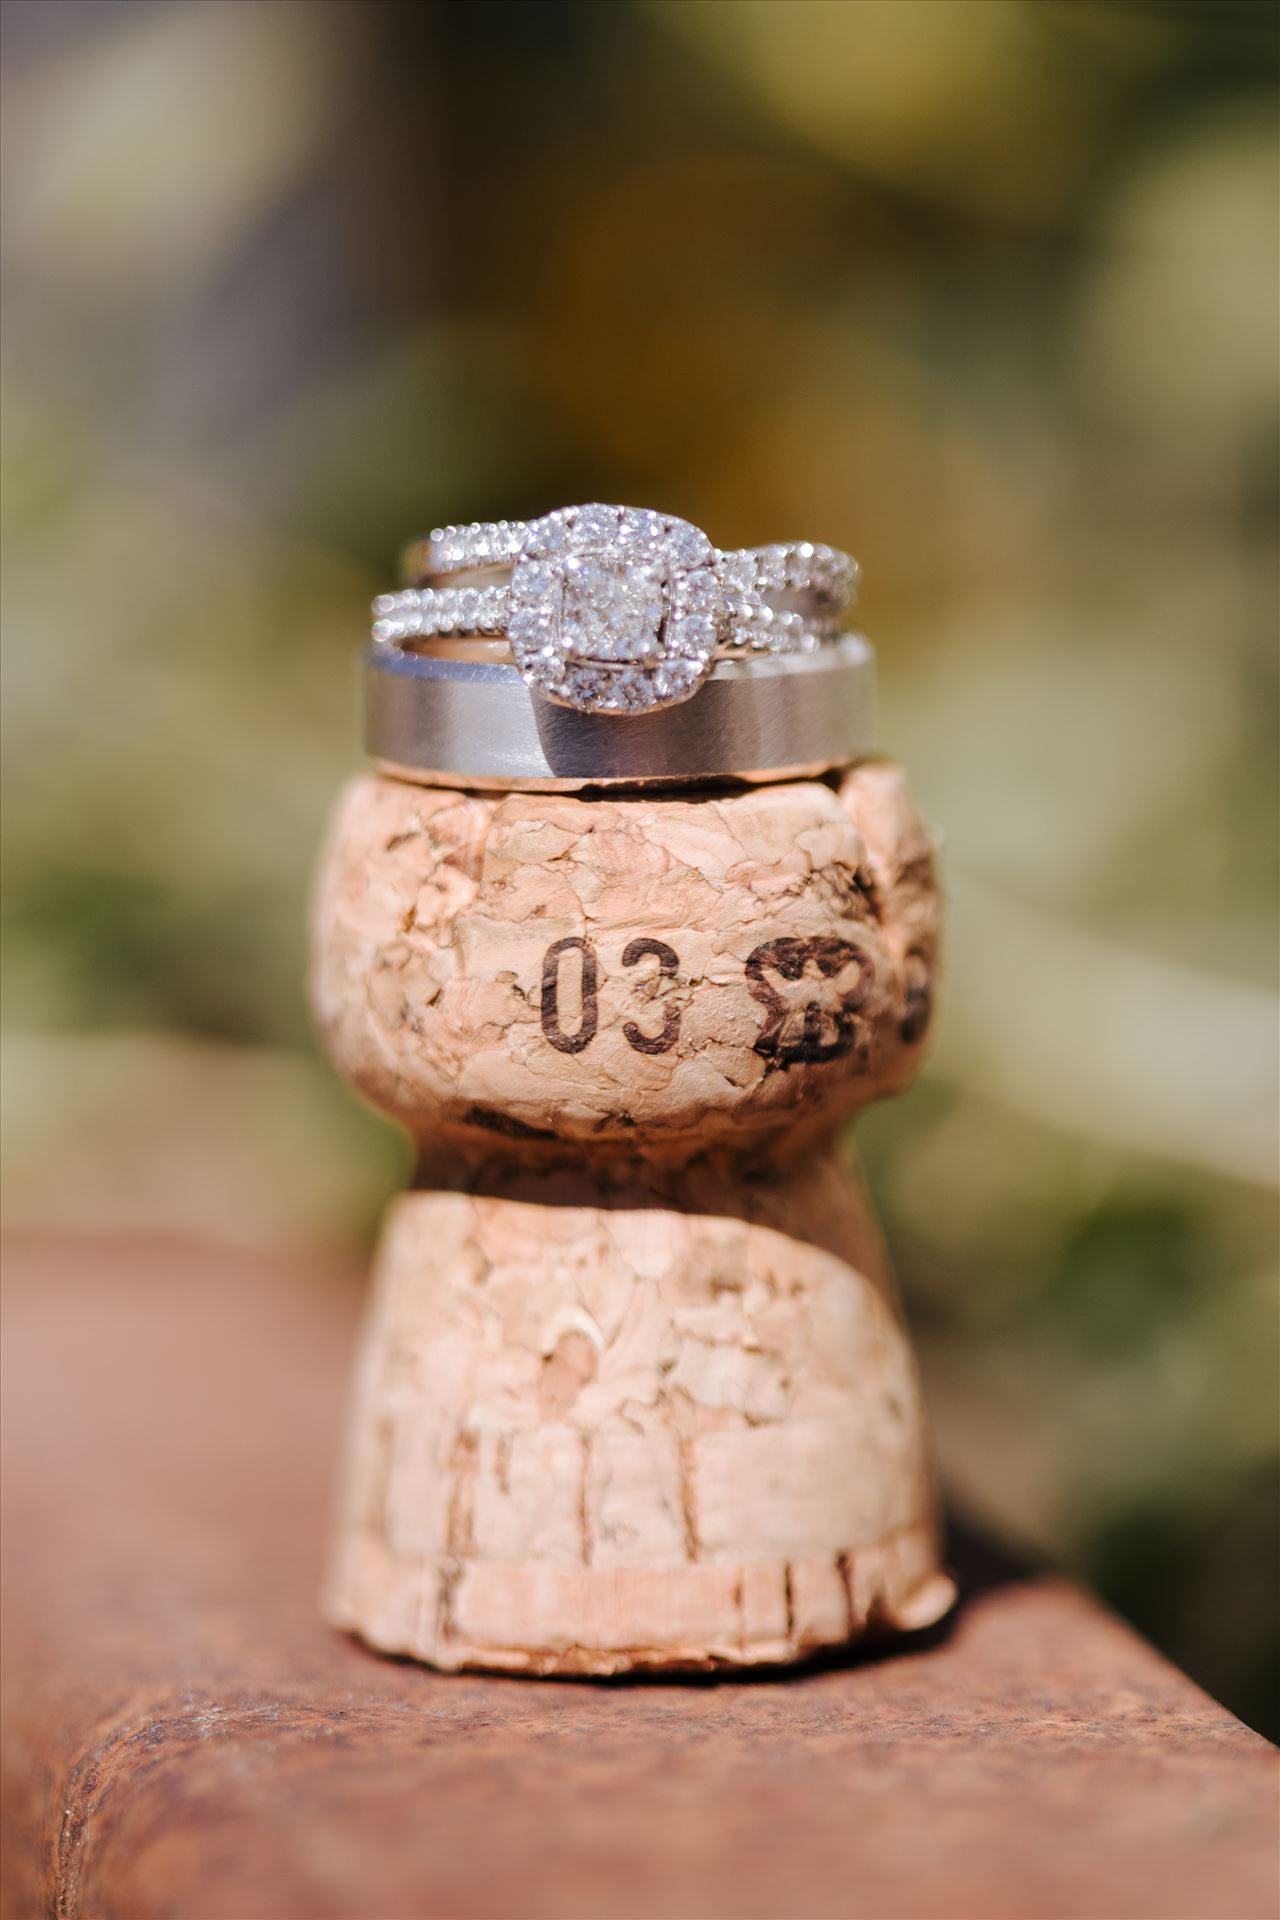 _Y9A6475.JPG Tooth and Nail Winery elegant and formal wedding in Paso Robles California wine country by Mirror's Edge Photography, San Luis Obispo County Wedding Photographer. Wedding rings on wine cork by Sarah Williams